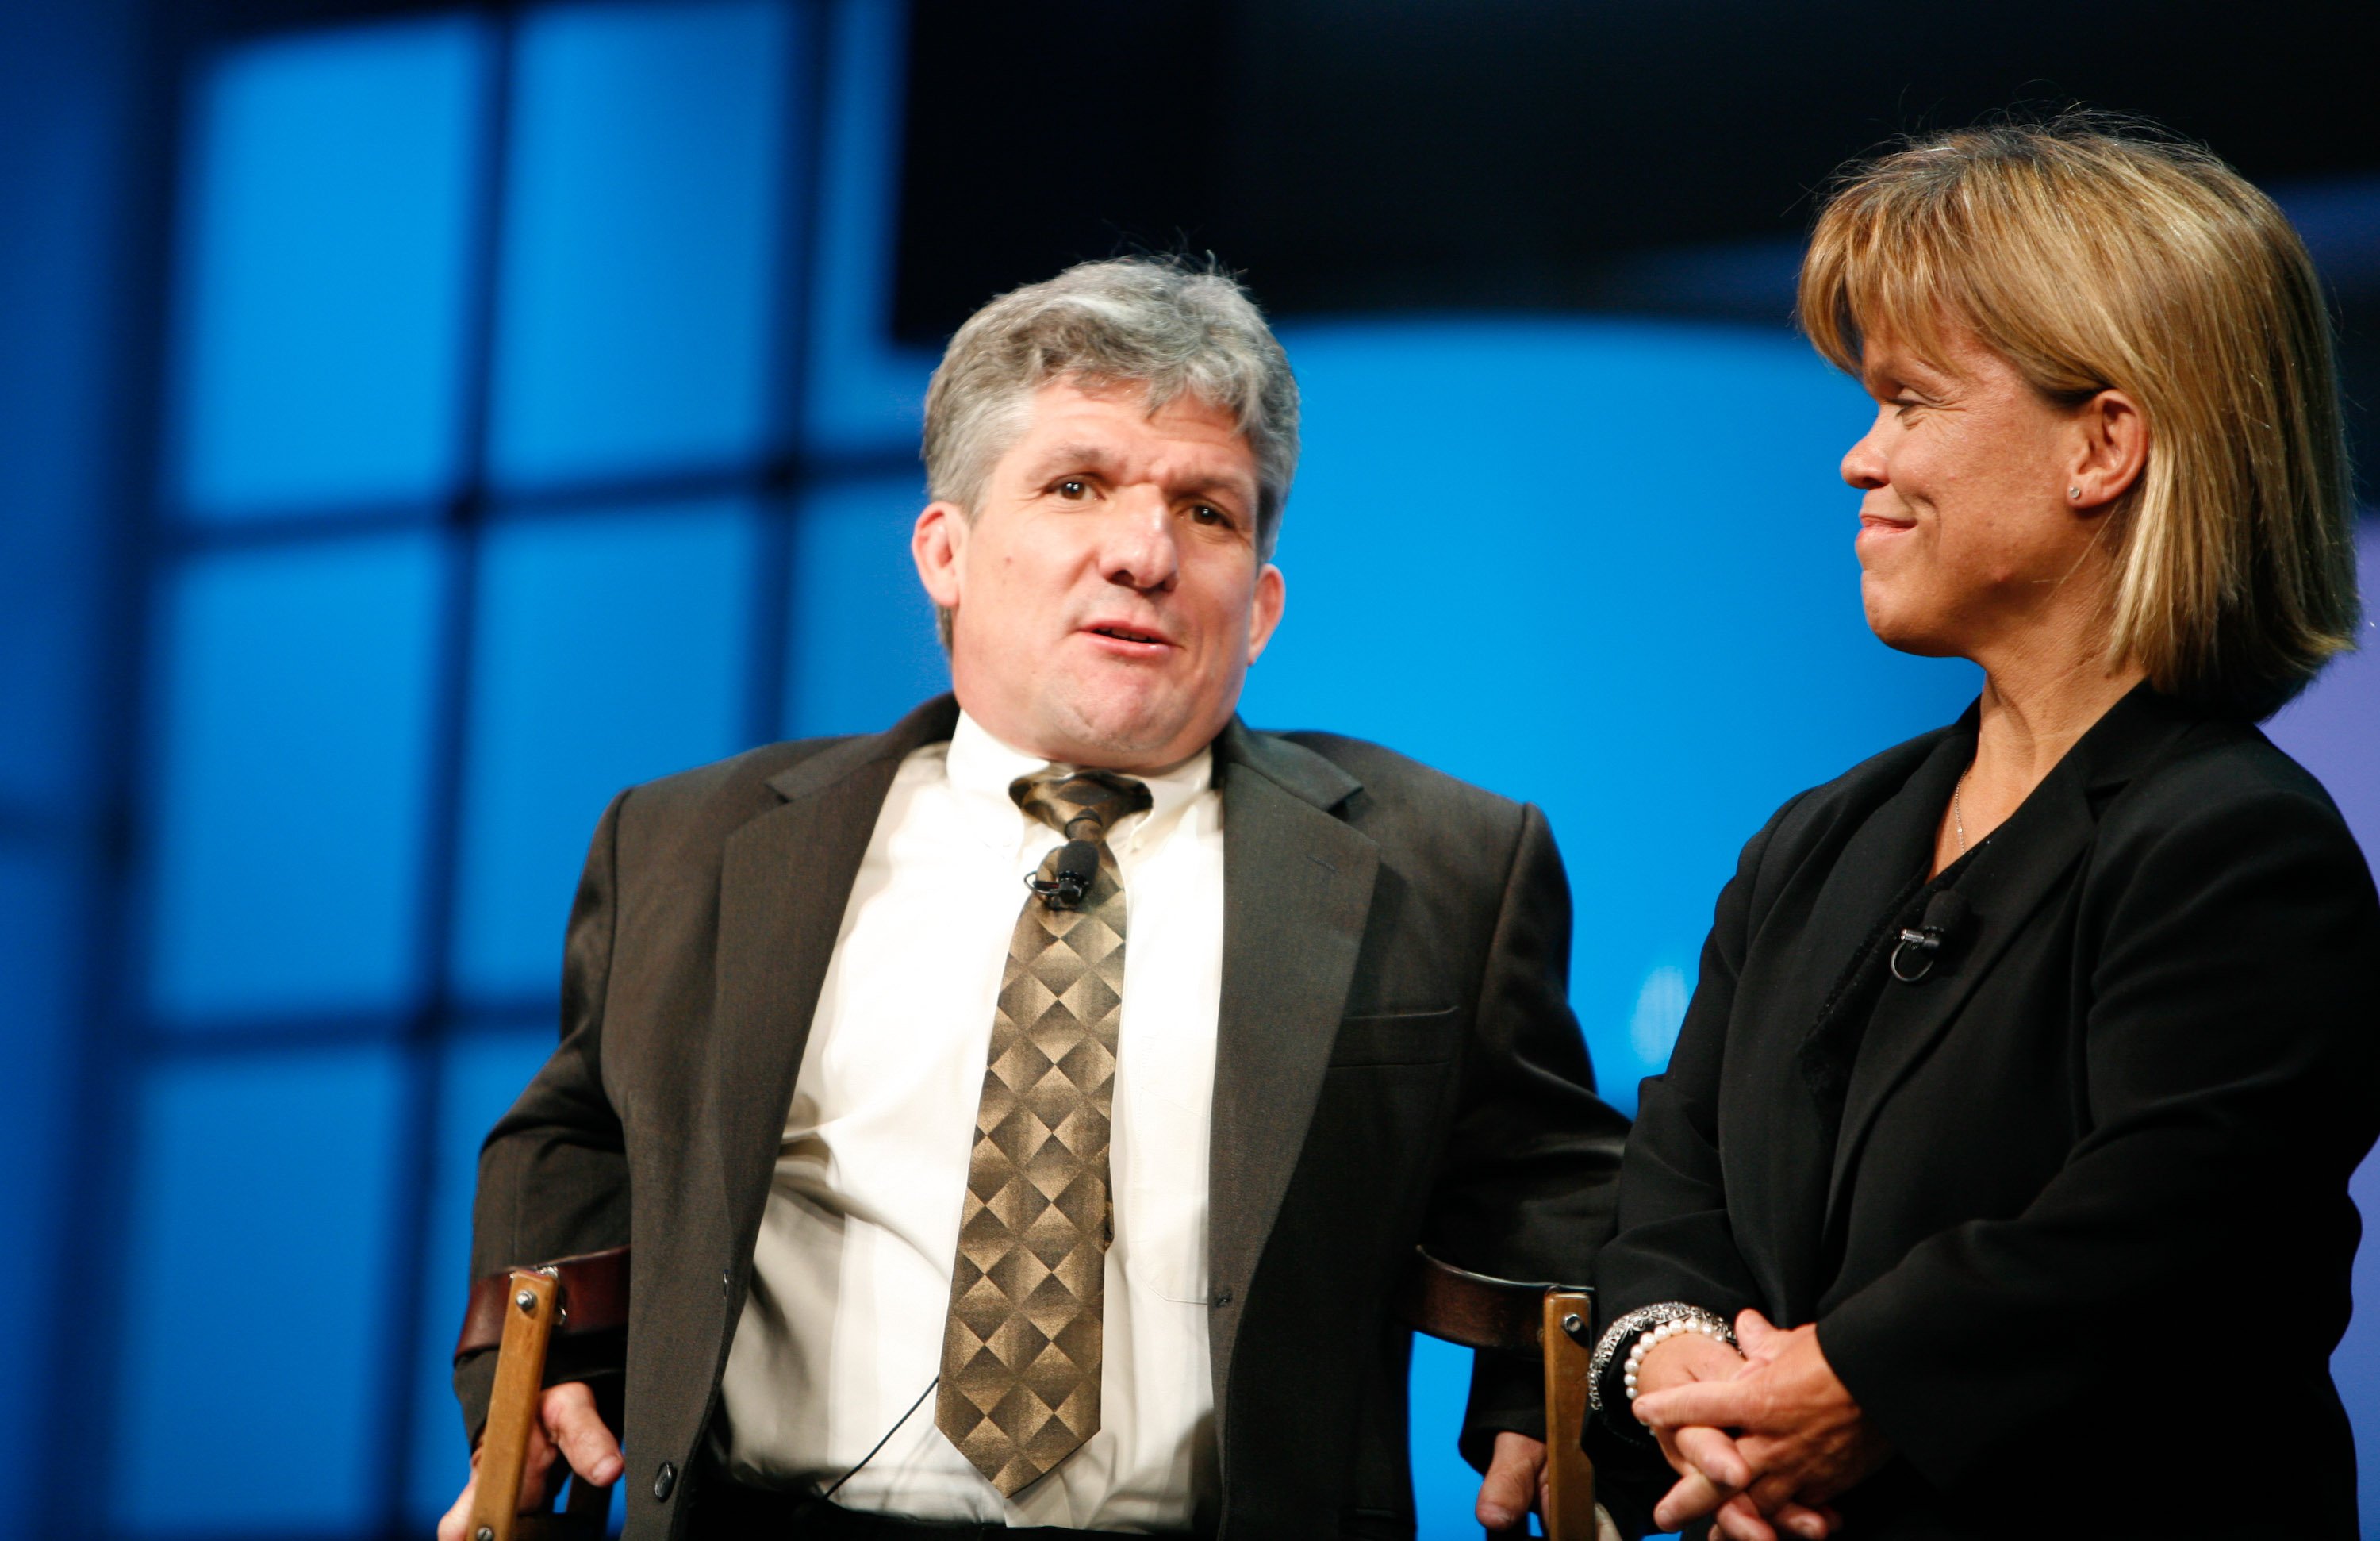  "Little People Big World" Matthew Roloff (L) and Amy Roloff (R) speak at the Discovery Upfront event at Jazz at Lincoln Center on April 23, 2008| Photo: Getty Images